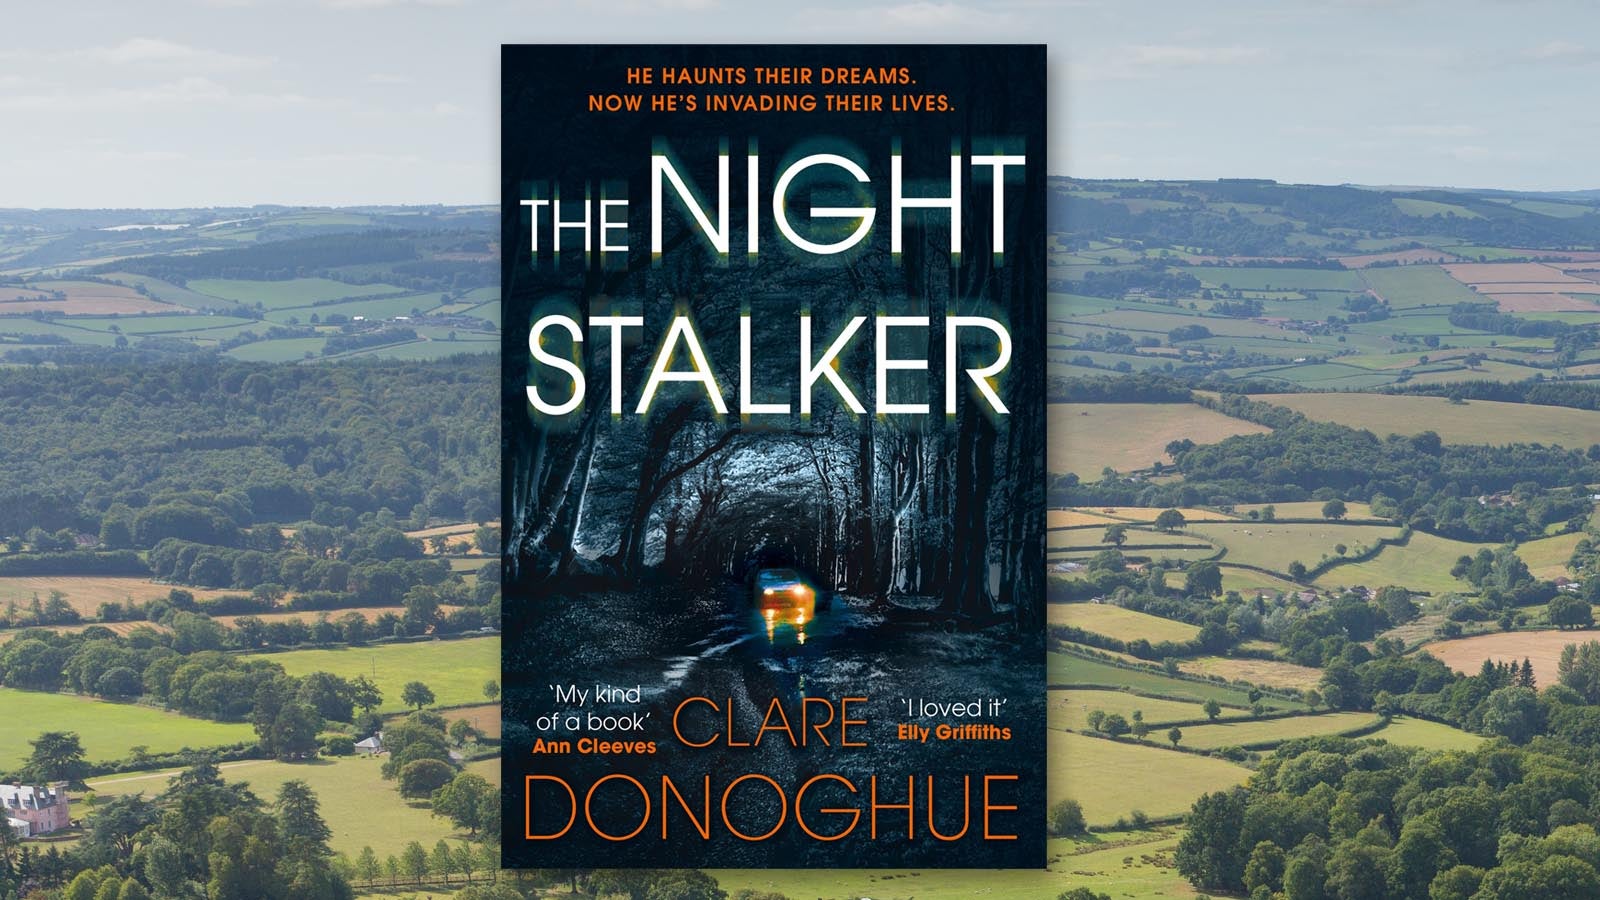 The Night Stalker by Clare Donoghue book cover on a background of fields 